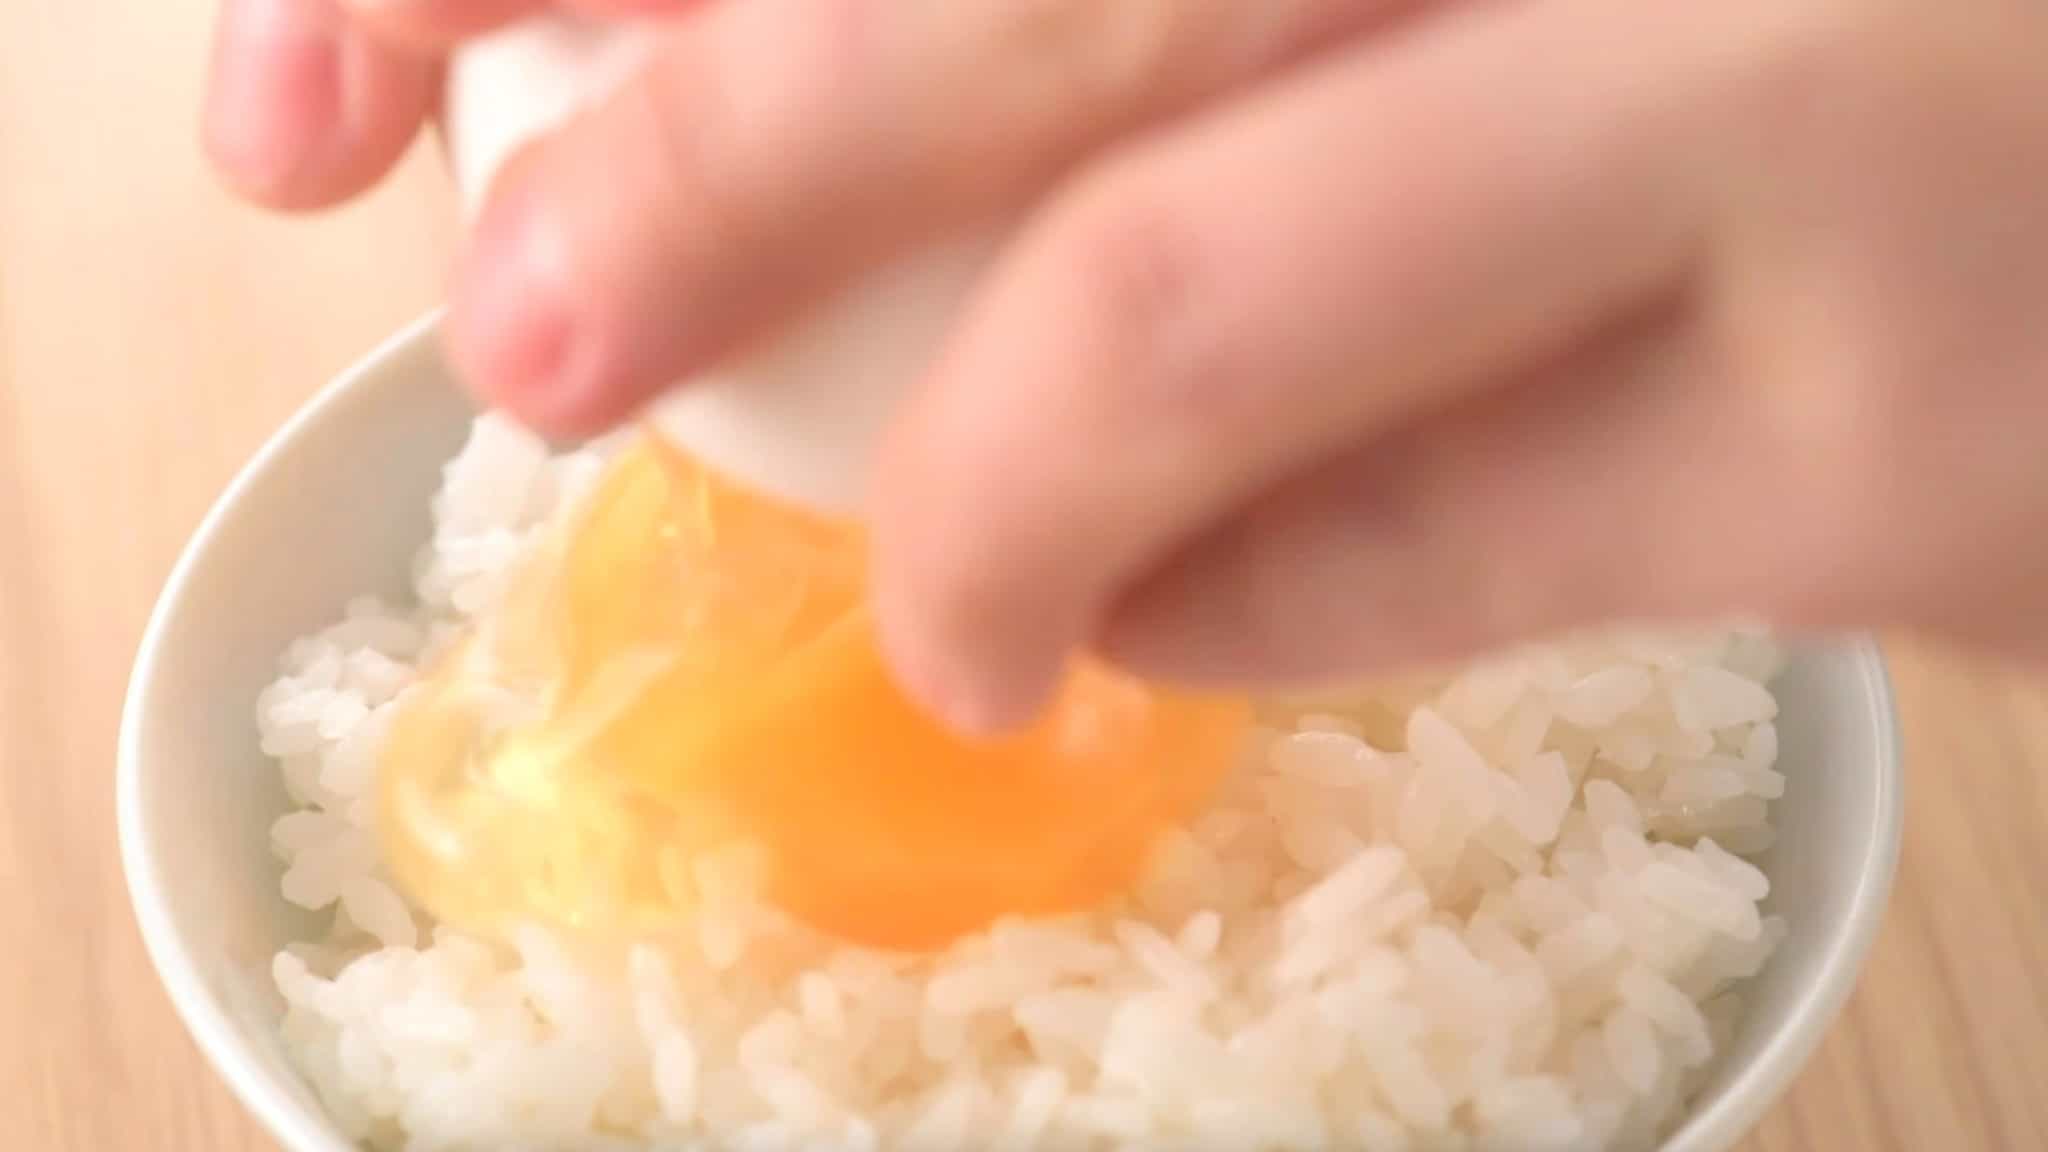 Why do Japanese people put raw eggs on their rice